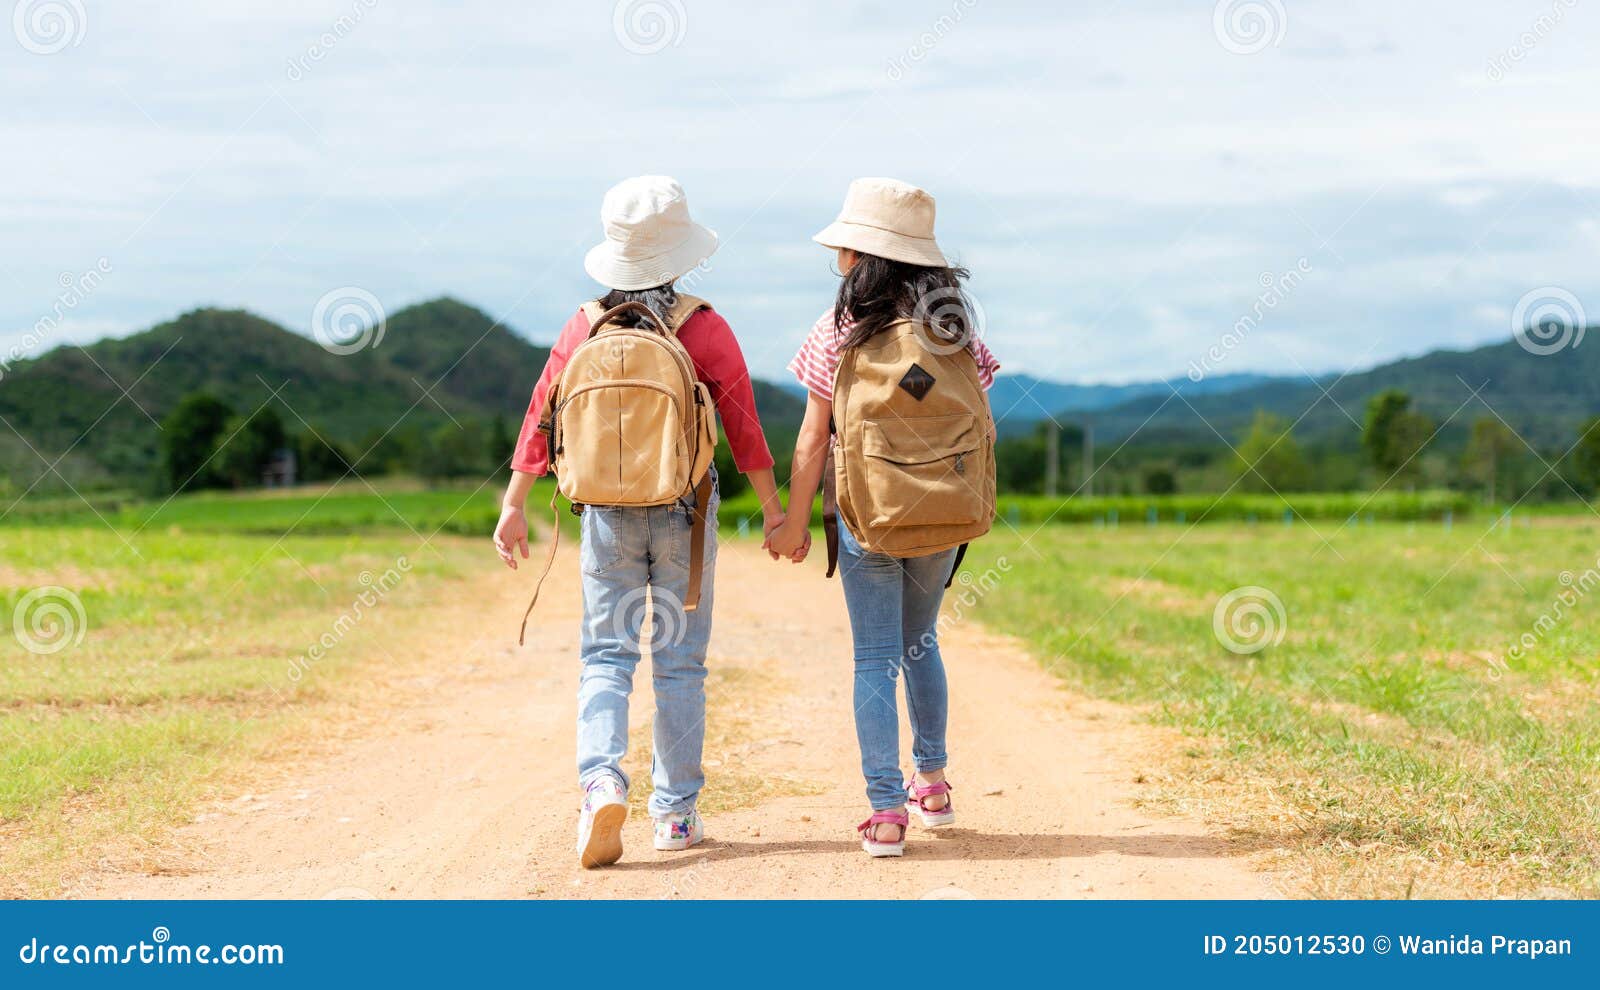 group friend children travel nature summer trips.  family asia people tourism walking on road happy and fun explore